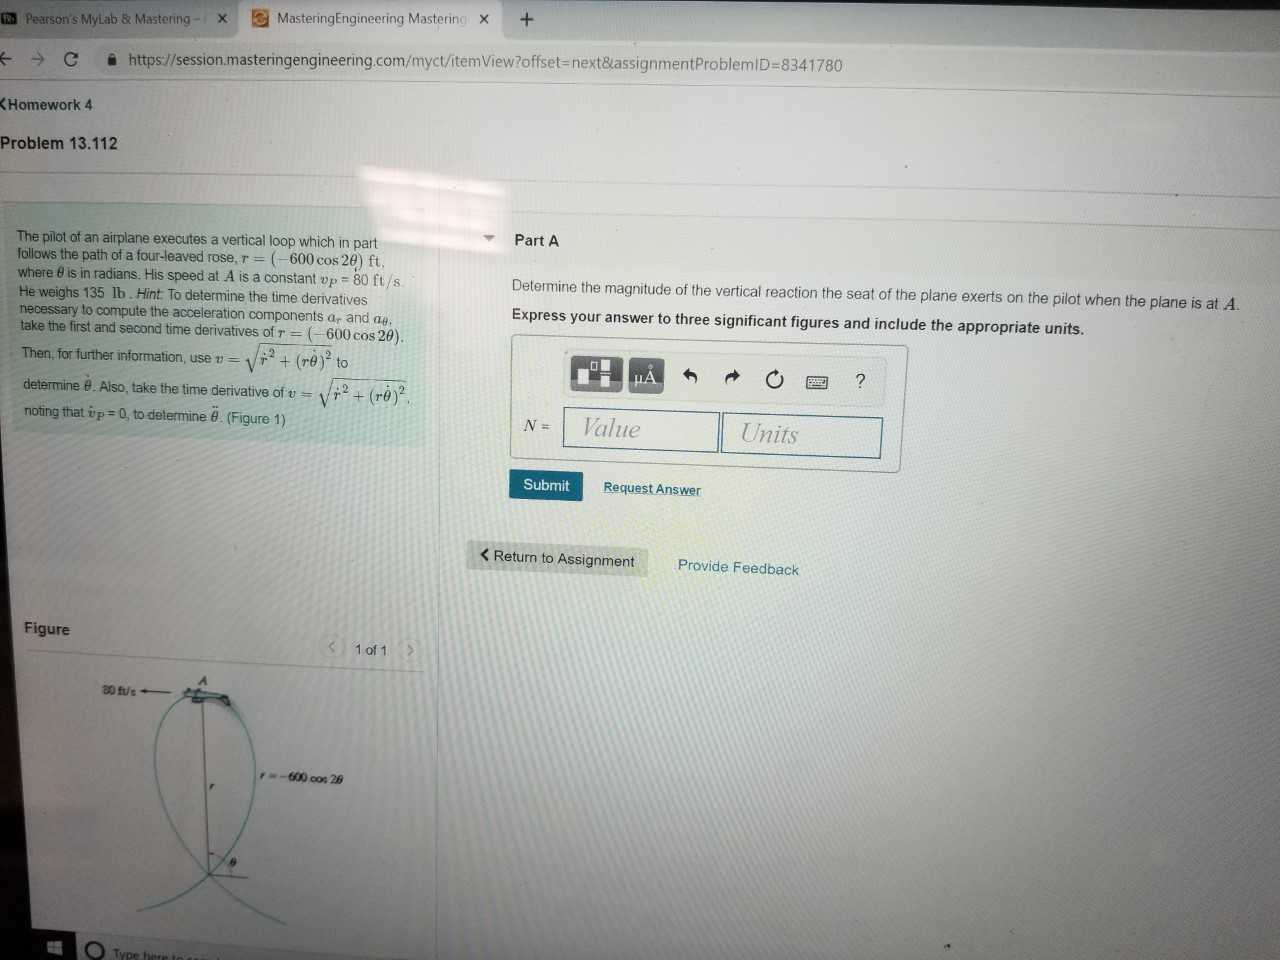 Pearson's MyLab & MasteringMasteringEngineering Mastering x+
C https://session.masteringengineering.com/myct/itemView?offset- next&lassignmentProblemiD-8341780
Homework 4
Problem 13.112
Part A
The pilot of an airplane executes a vertical loop which in part
follows the path of a four-leaved rose,r (-600 cos 20 ft,
where θ is in radians. His speed at A is a constant up-80 ft/s
He weighs 135 lb. Hint To determine the time derivatives
necessary to compute the acceleration components ar and ae
take the first and second time derivatives of r -600 cos 20)
Determine the magnitude of the vertical reaction the seat of the plane exerts on the pilot when the plane is at A
Express your answer to three significant figures and include the appropriate units.
Then,for turther infomalion use +(re) to
determine θ. Also, take the time derivative of-yW + (ref
noting that tp:0, to determined (Figure 1)
NValue
Units
Submit
Request Answer
K Return to Assignment
Provide Feedback
Figure
1 of 1
r-600 cos 26
